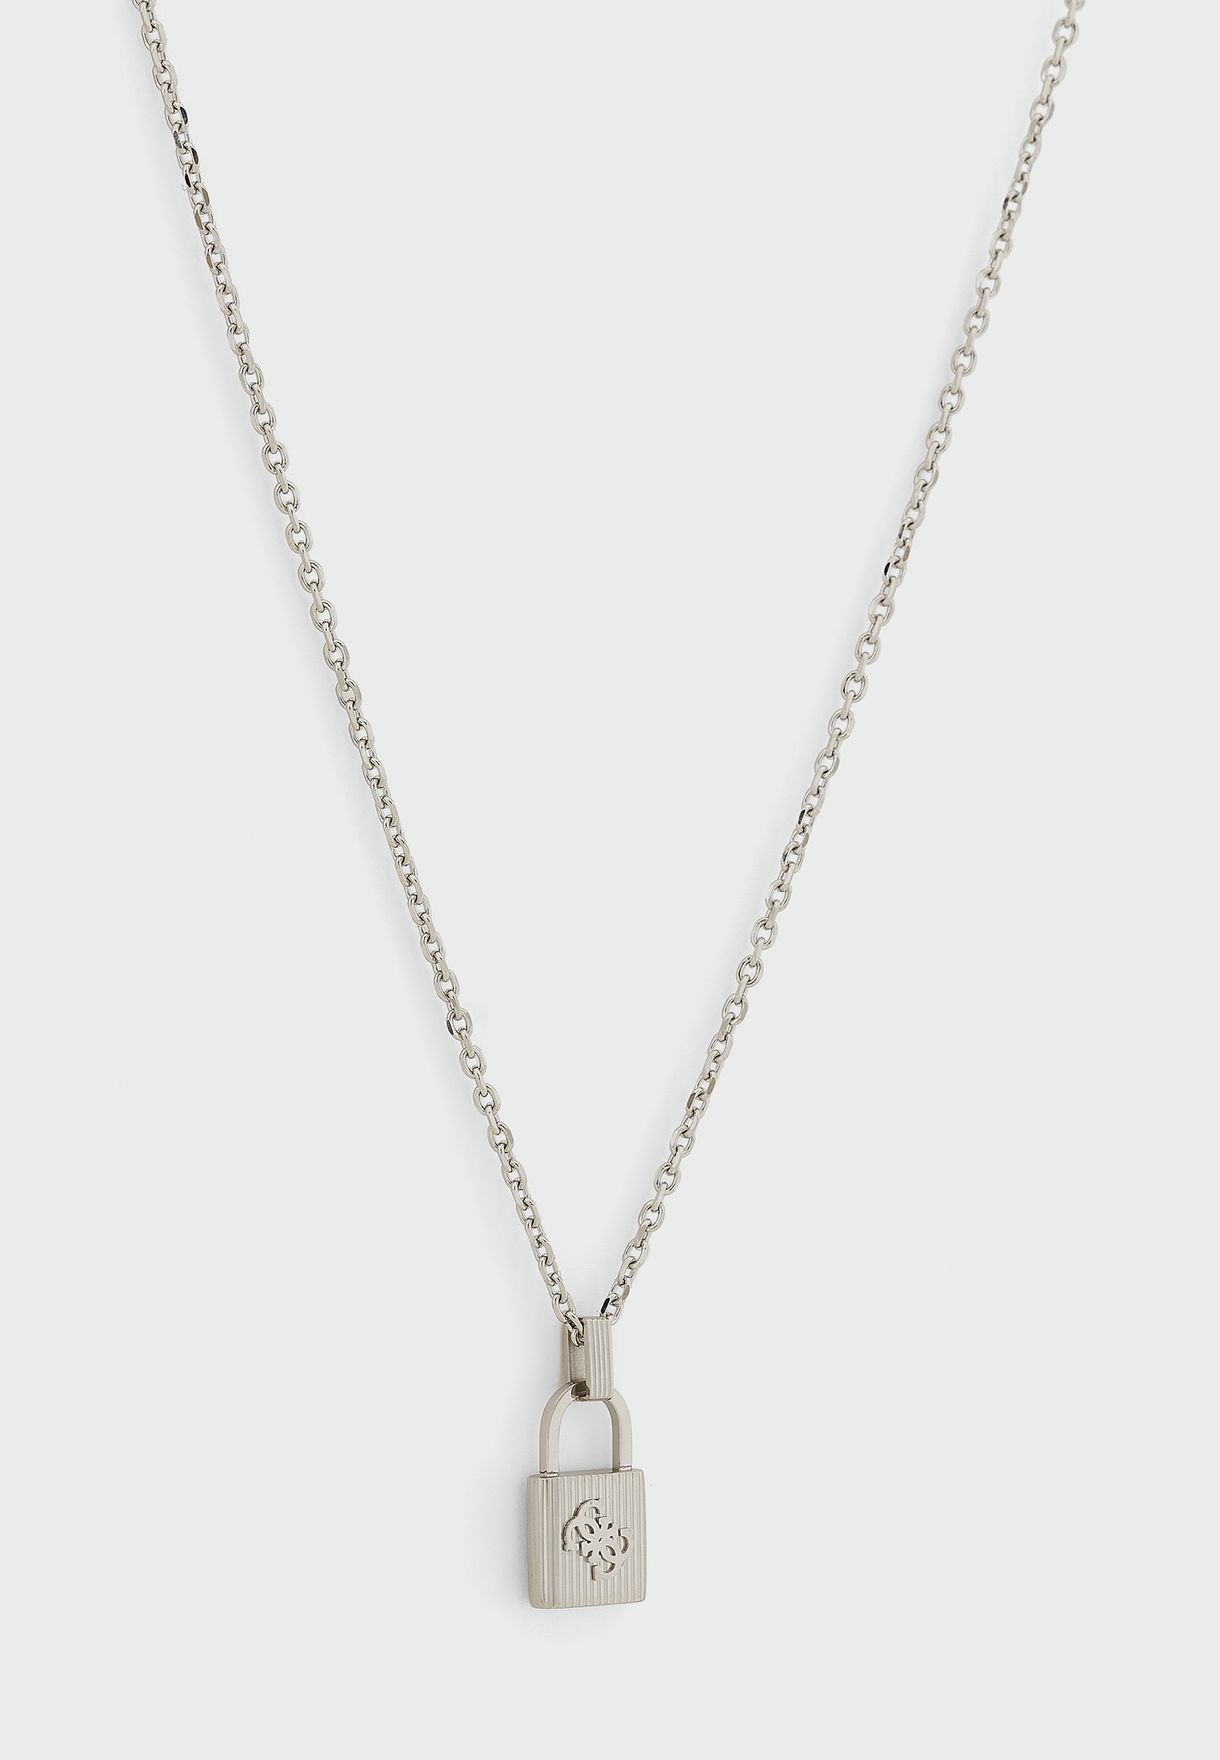 Casual Long Necklace